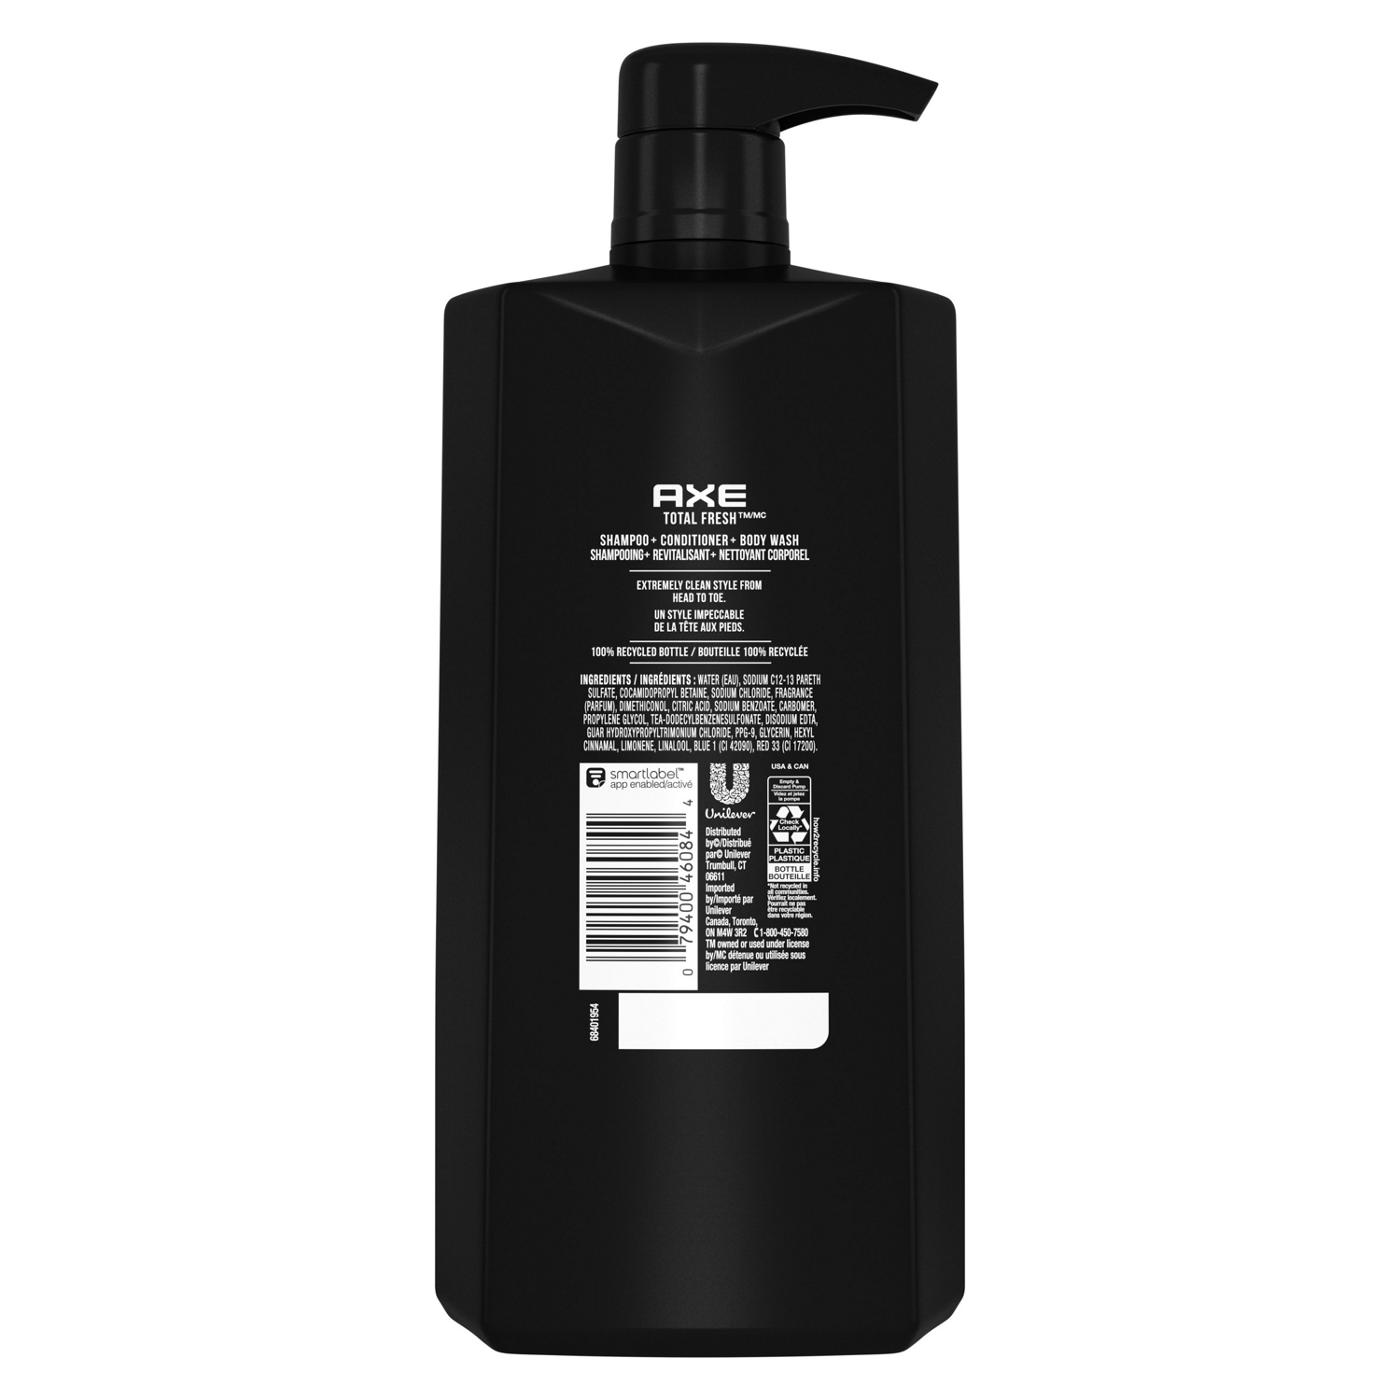 AXE Hair 3 in 1 Shampoo + Conditioner + Body Wash - Total Fresh; image 5 of 6